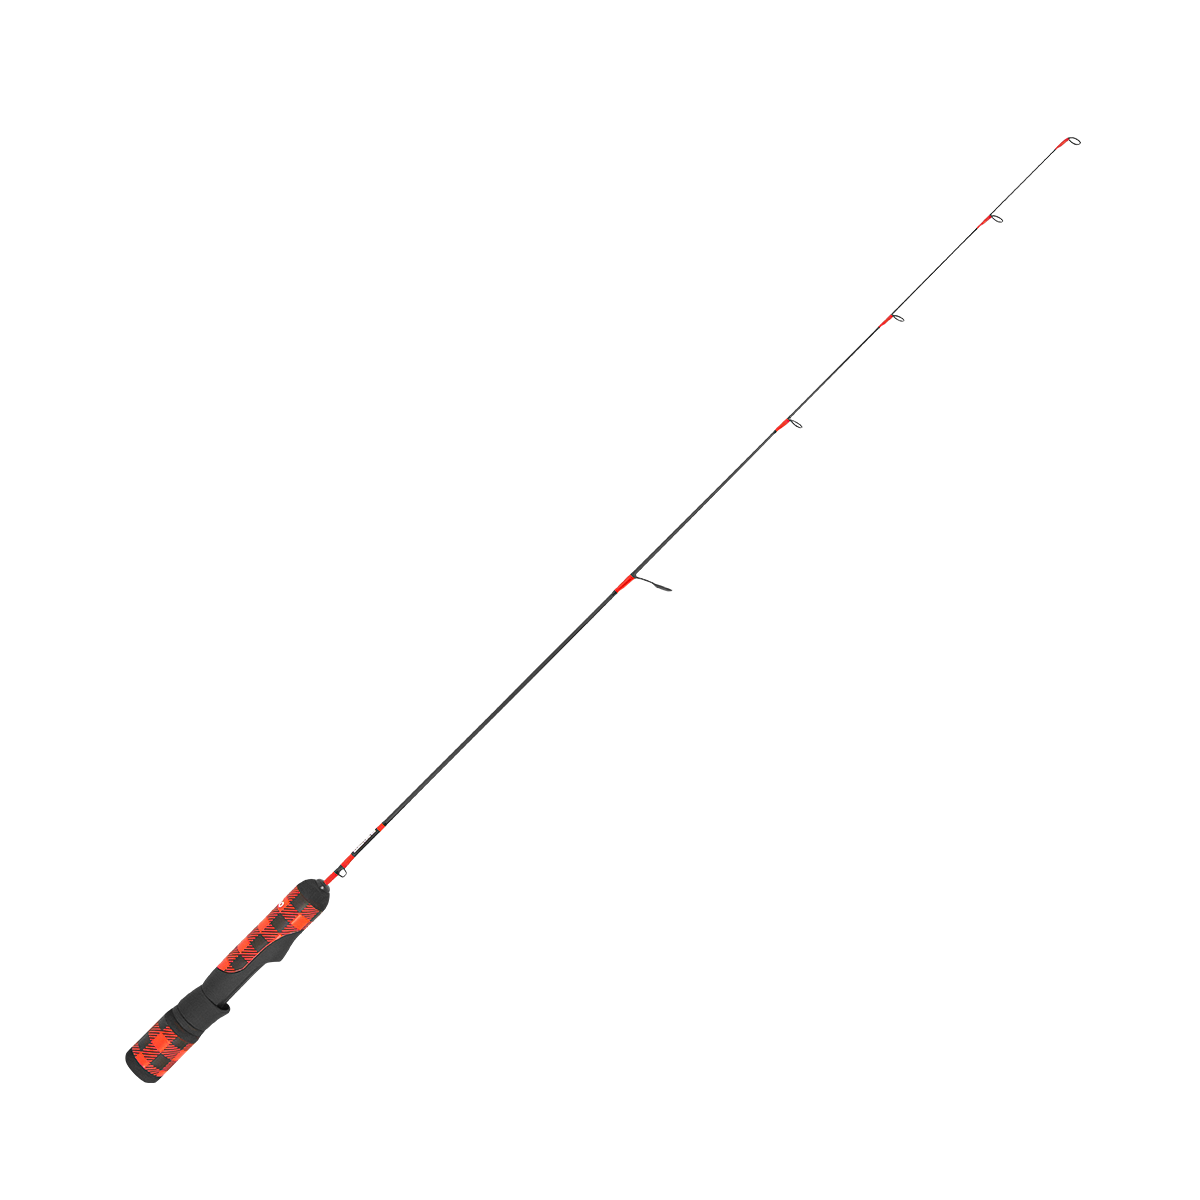 Eskimo Ice Fishing Gear - Eskimo X MAGS Custom Rods are now available  online! They are a limited edition and sure to go fast! #geteskimo  #magscustomrods